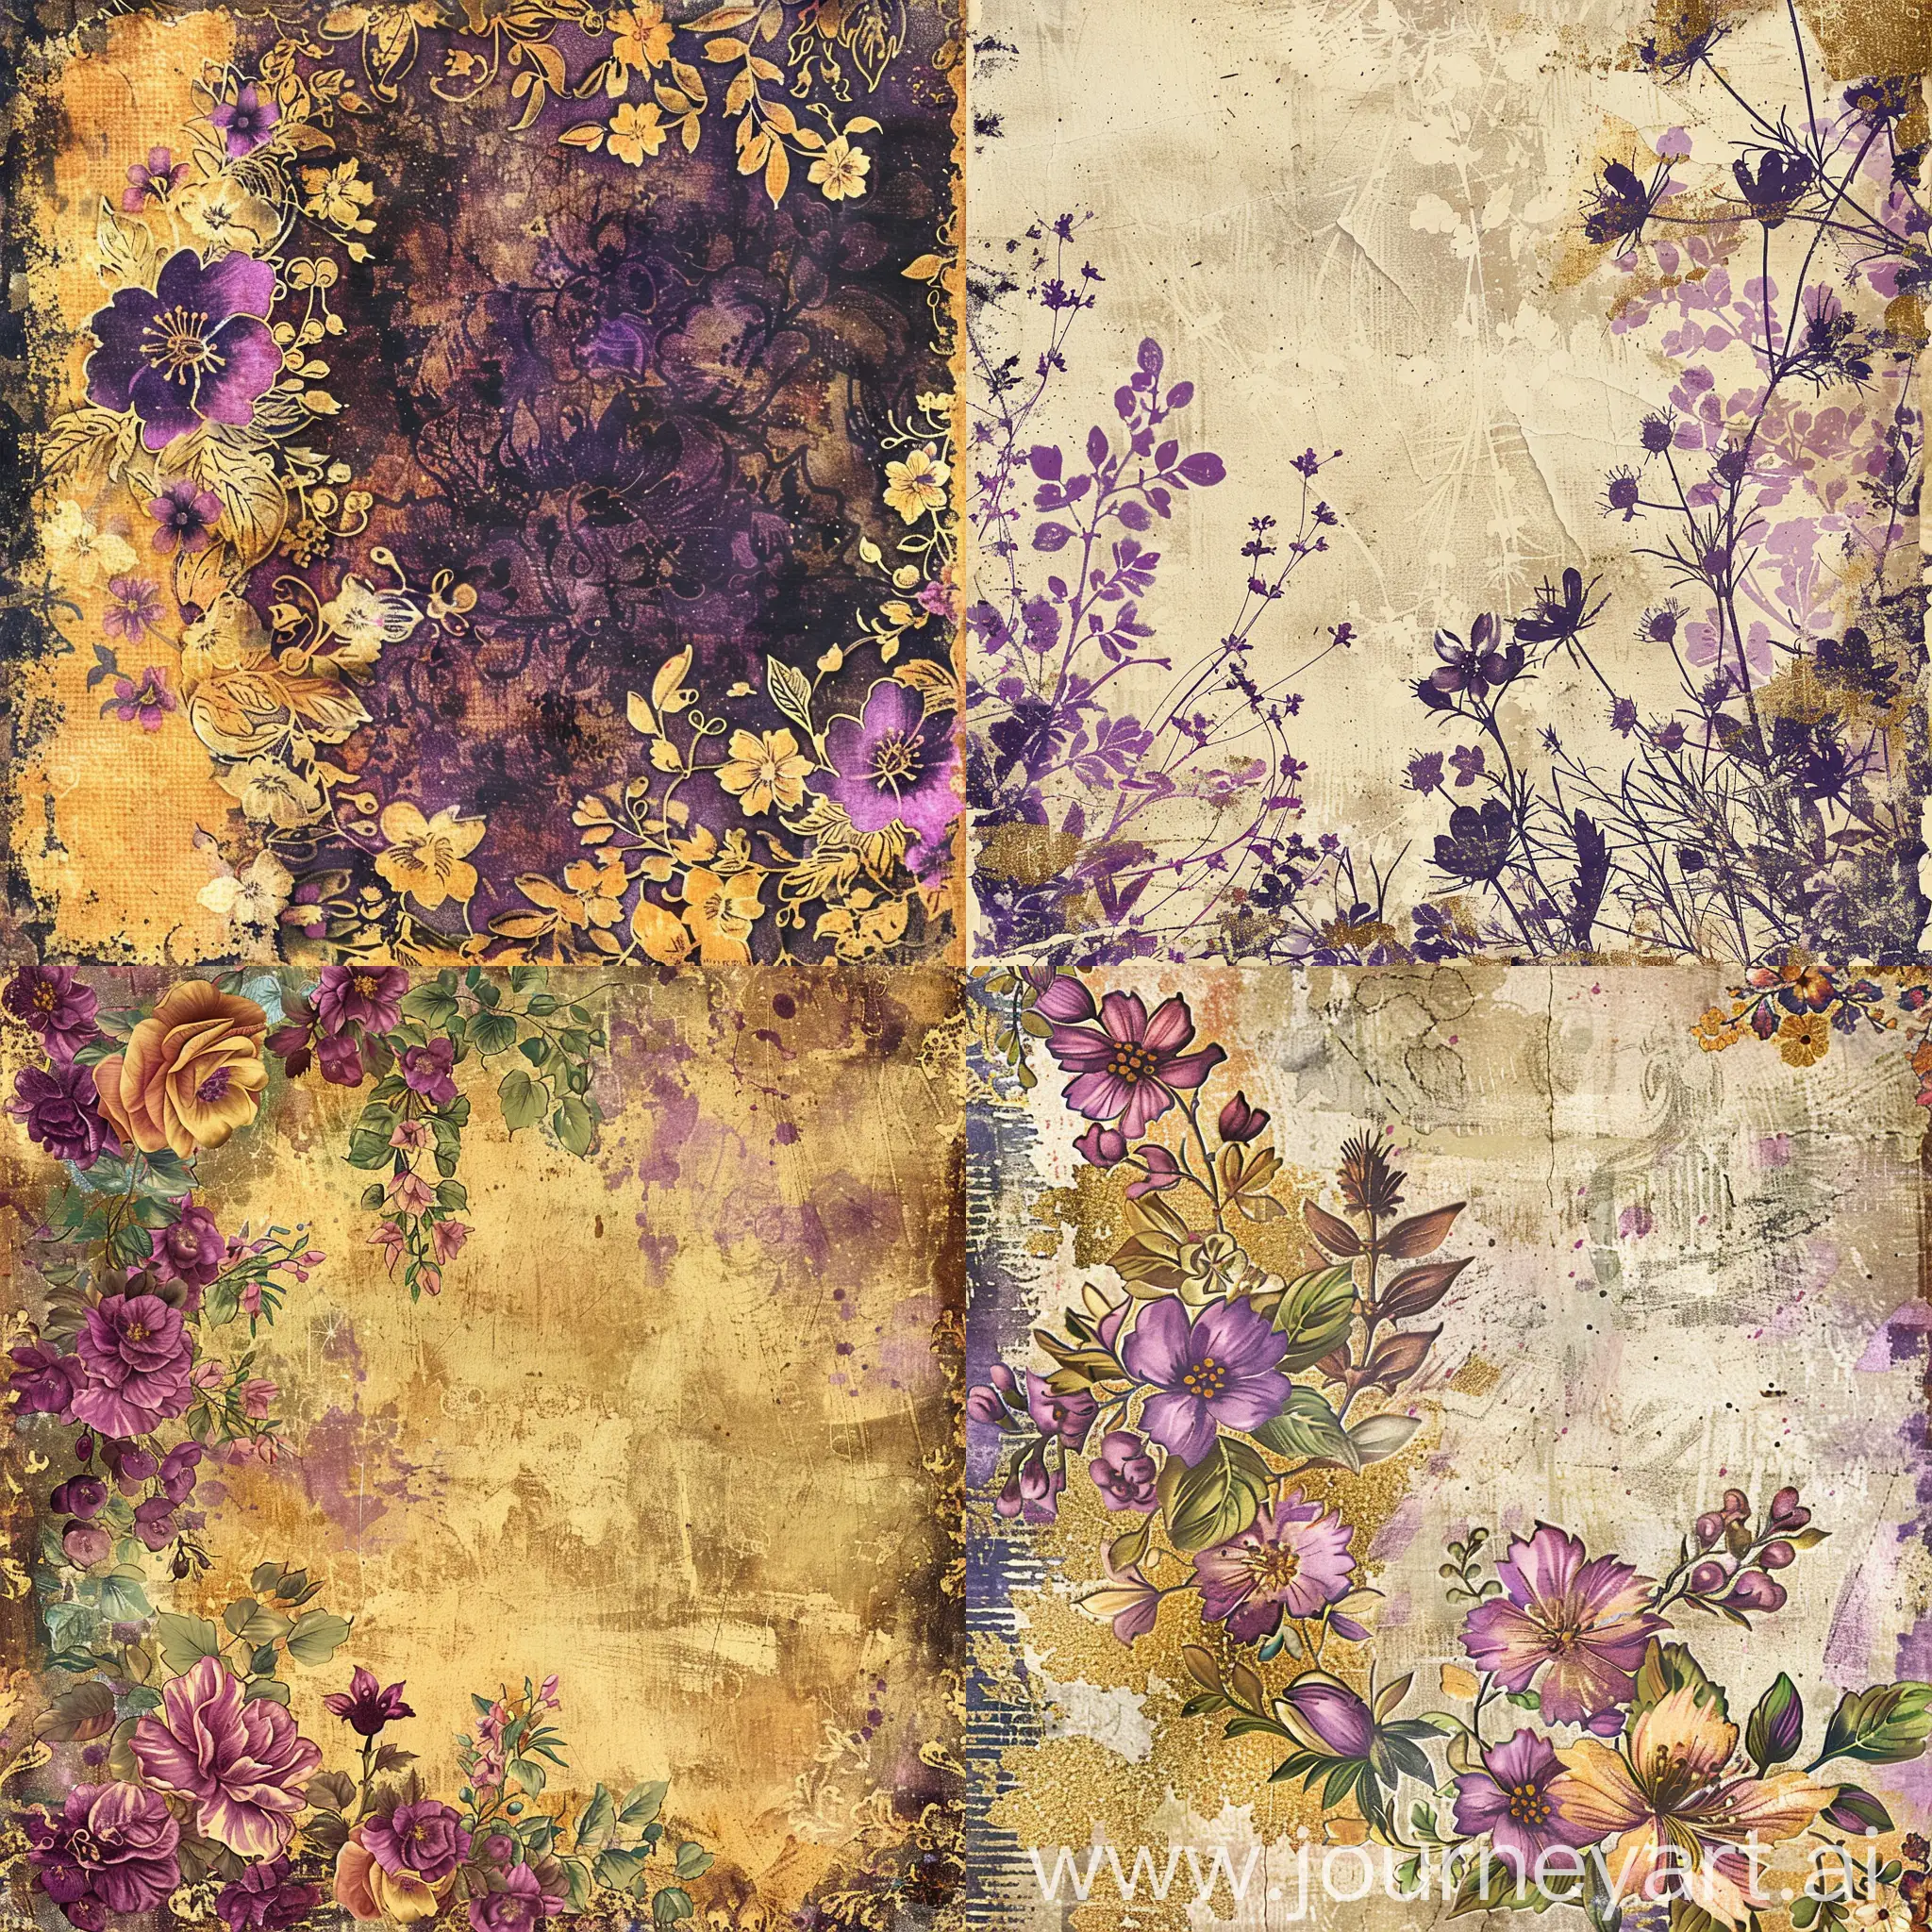 Floral, background ,beautiful, purple, gold Journal, Digital paper, Junk Journal, Decoupage Papers, Scrapbook Paper in Floral Vintage Style